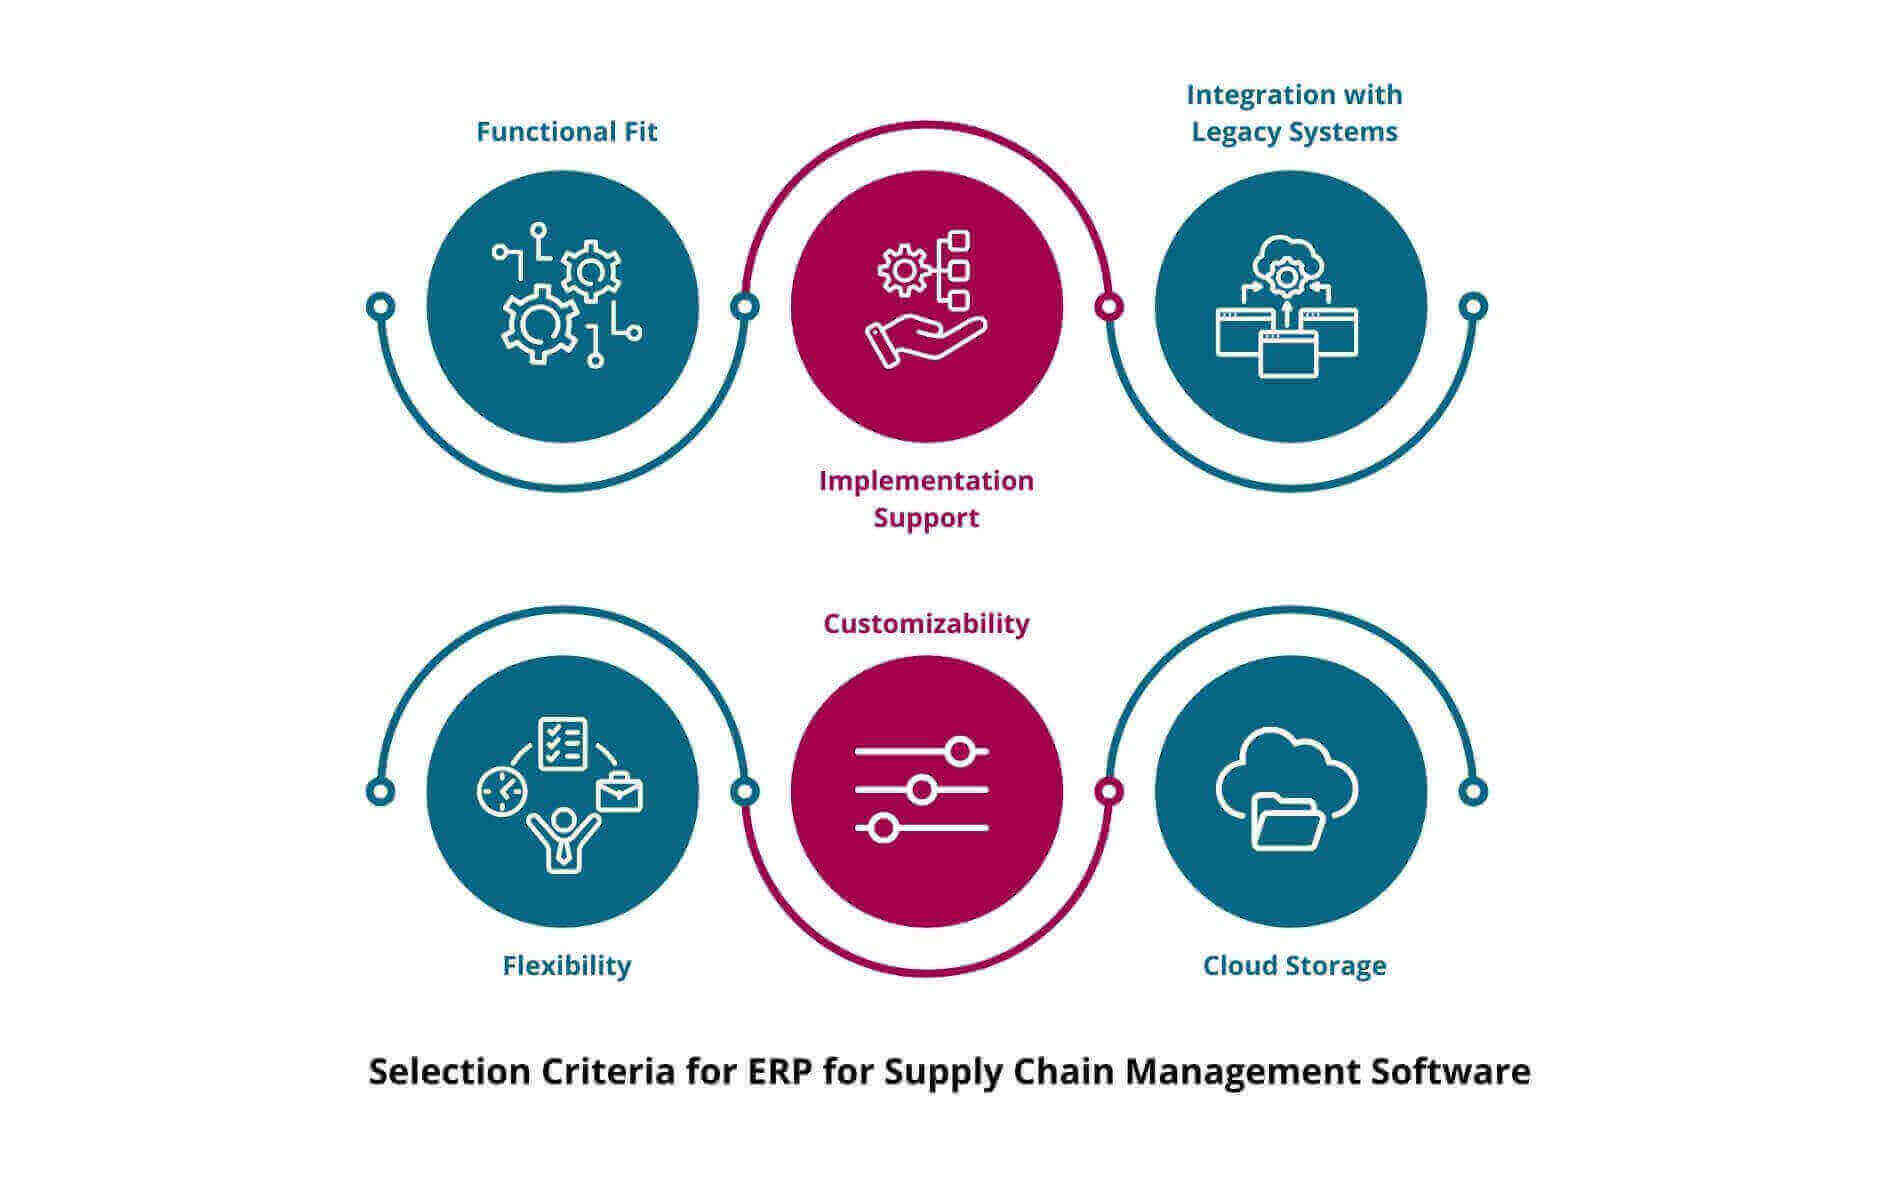 Selection Criteria for ERP for Supply Chain Management Software